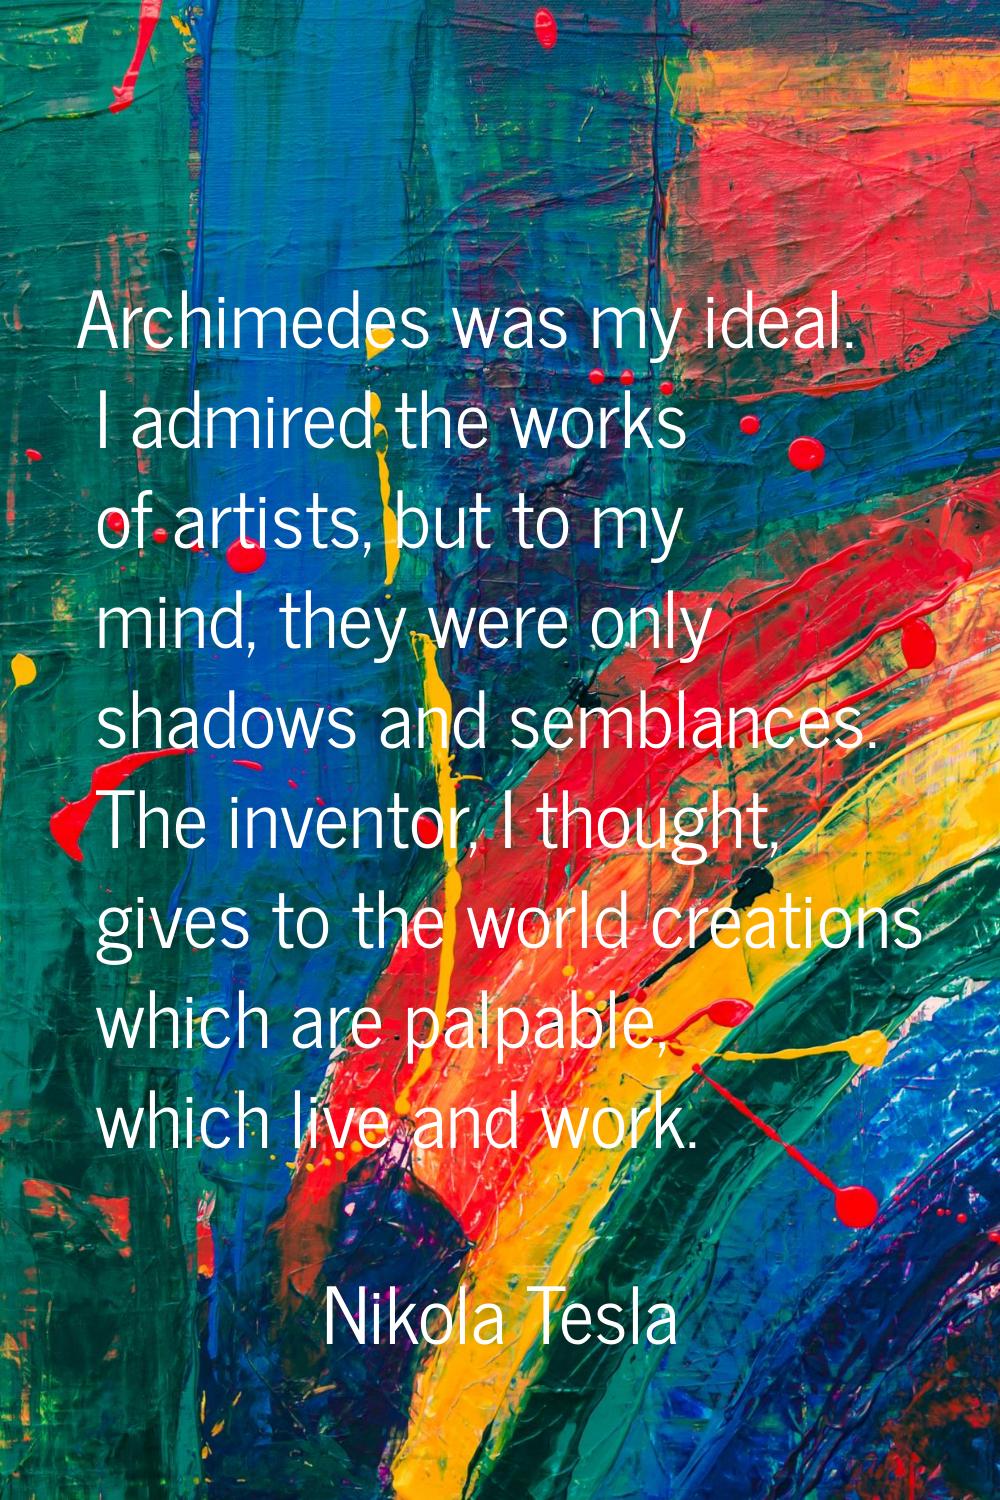 Archimedes was my ideal. I admired the works of artists, but to my mind, they were only shadows and